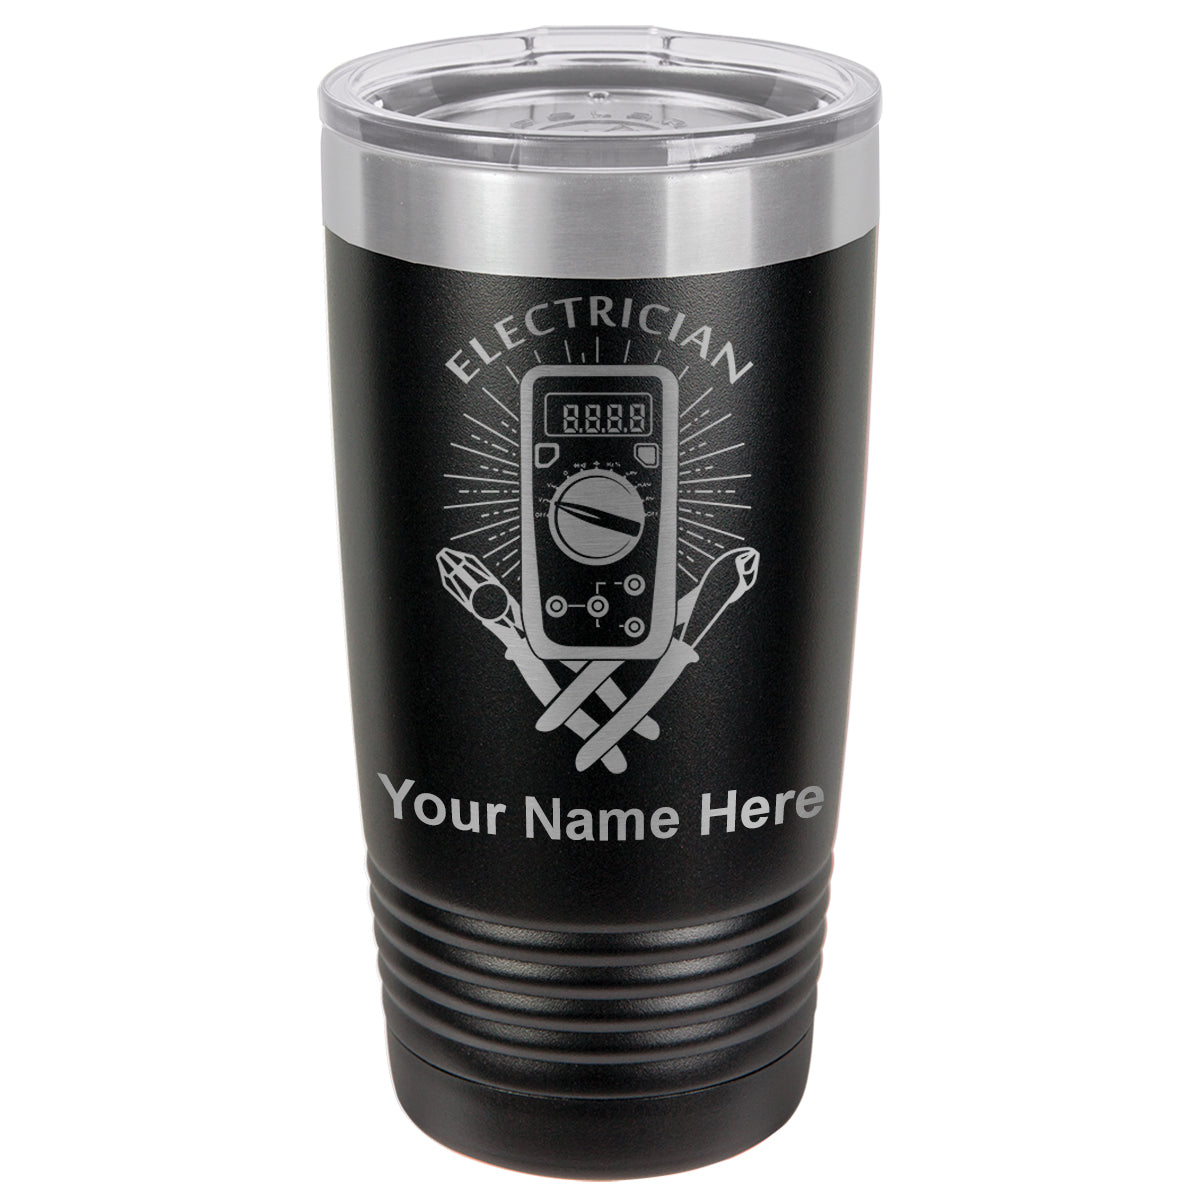 20oz Vacuum Insulated Tumbler Mug, Electrician, Personalized Engraving Included